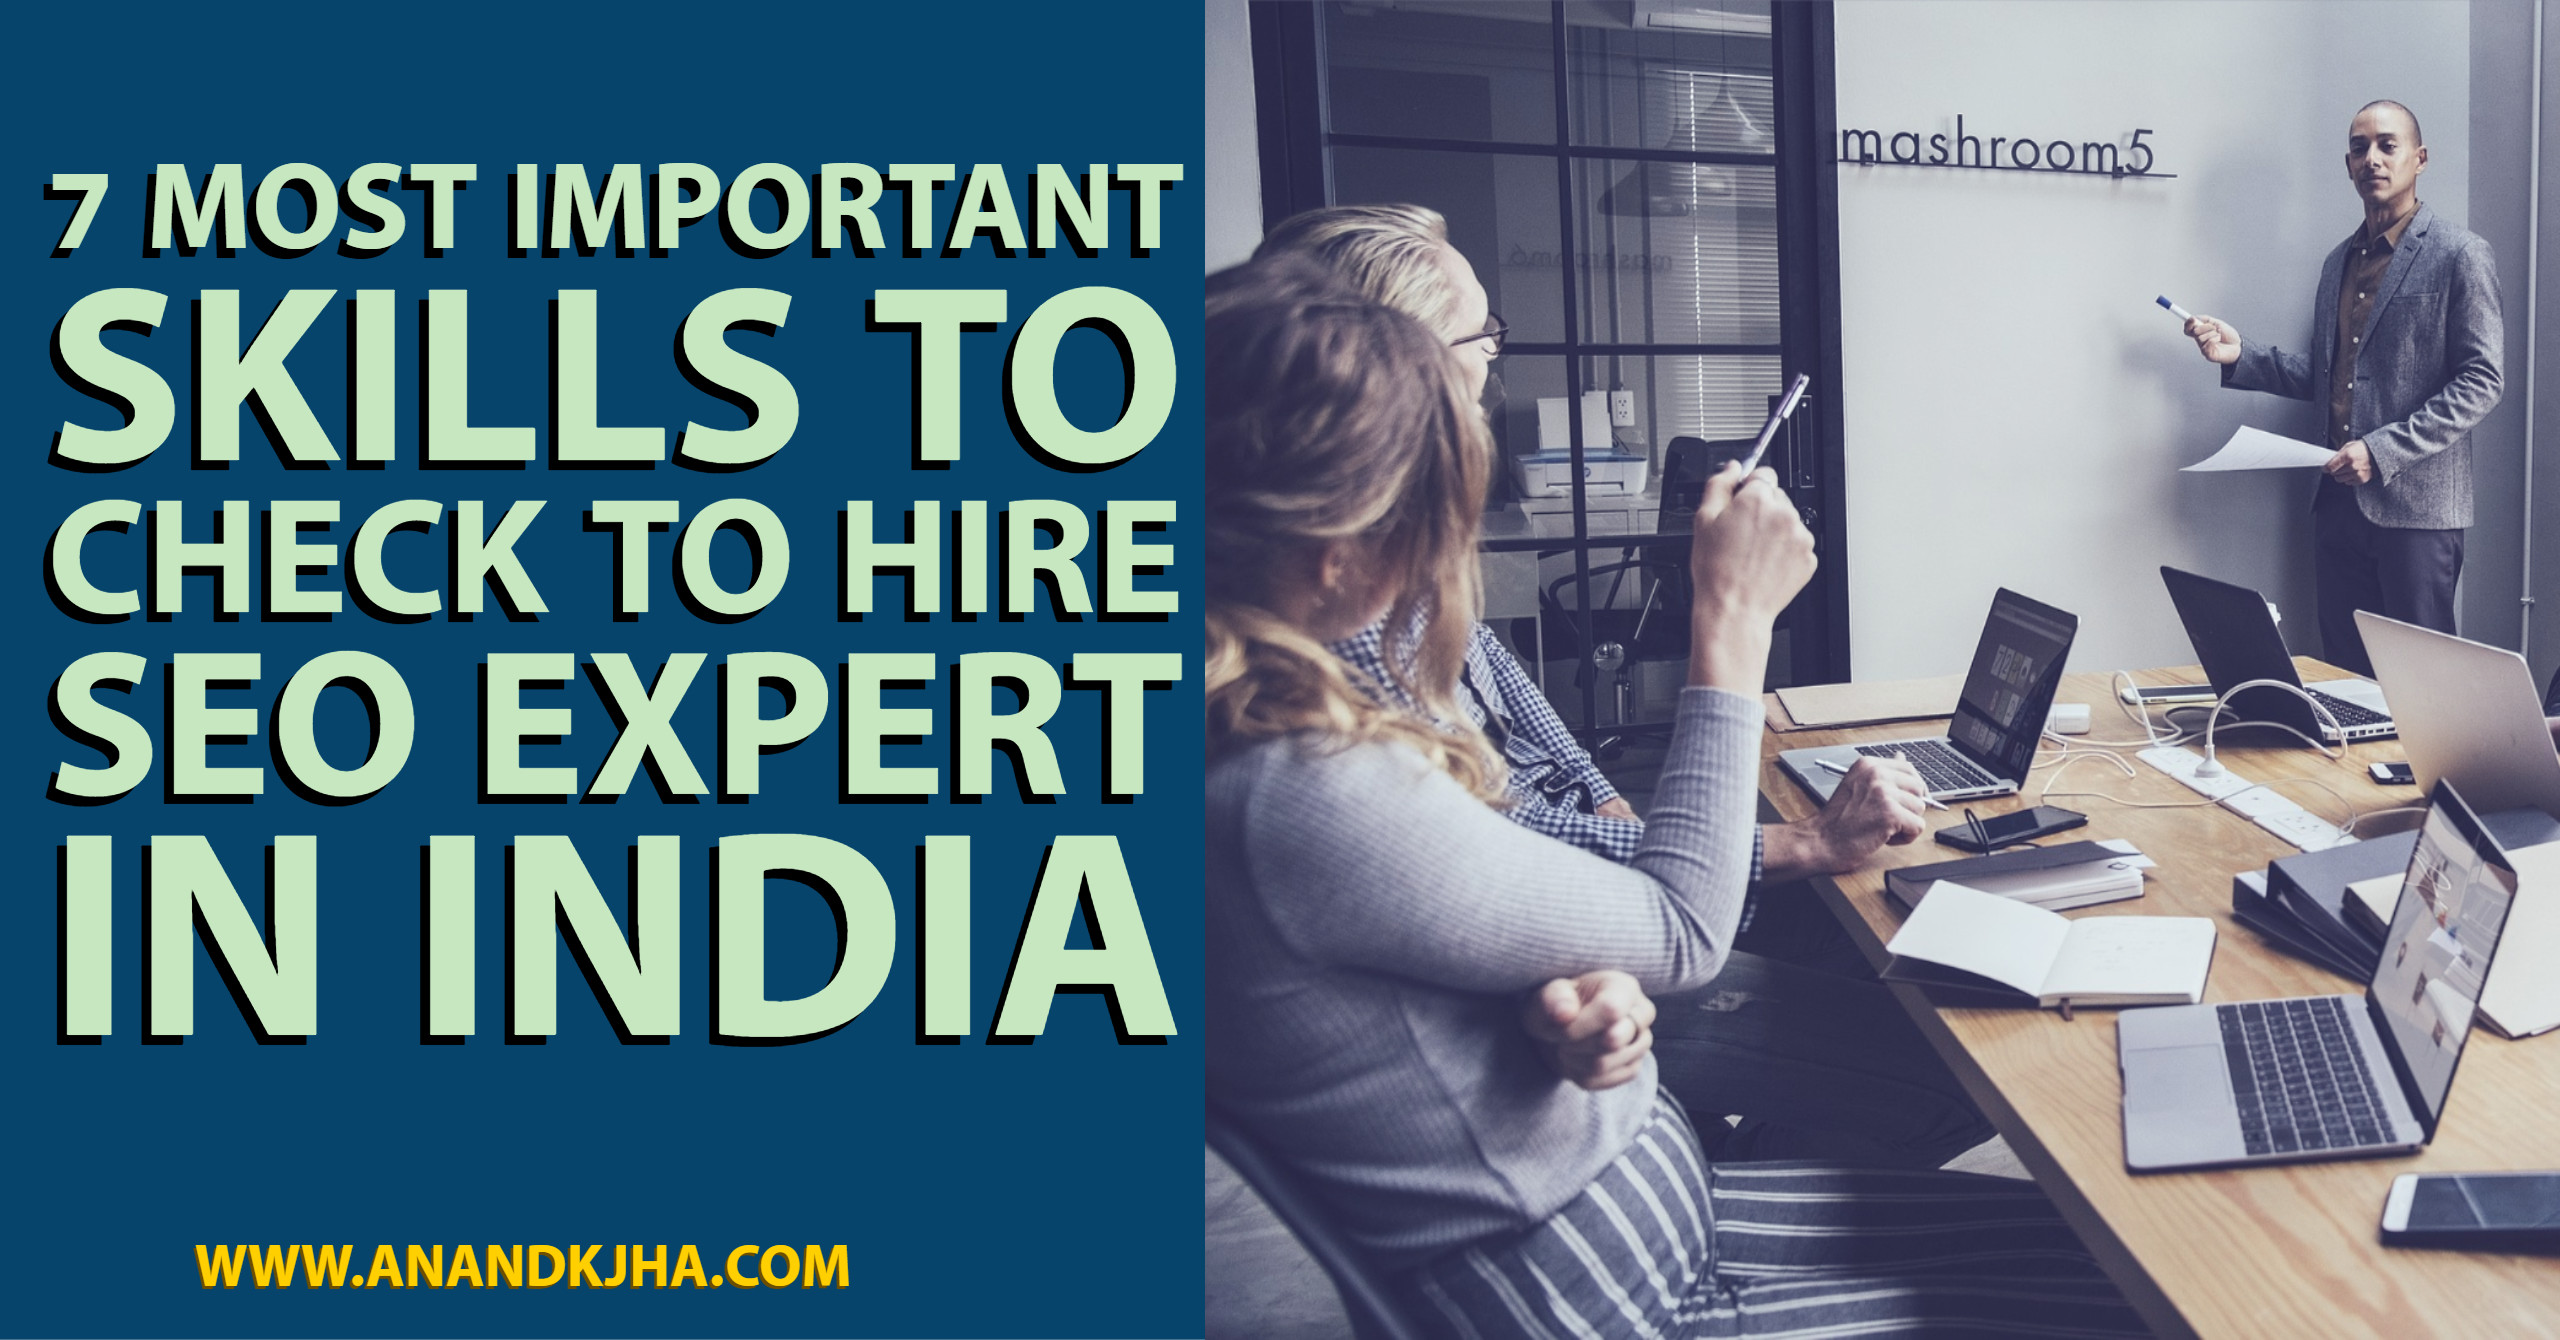 7 Most Important Skills to Check to Hire SEO Expert in India